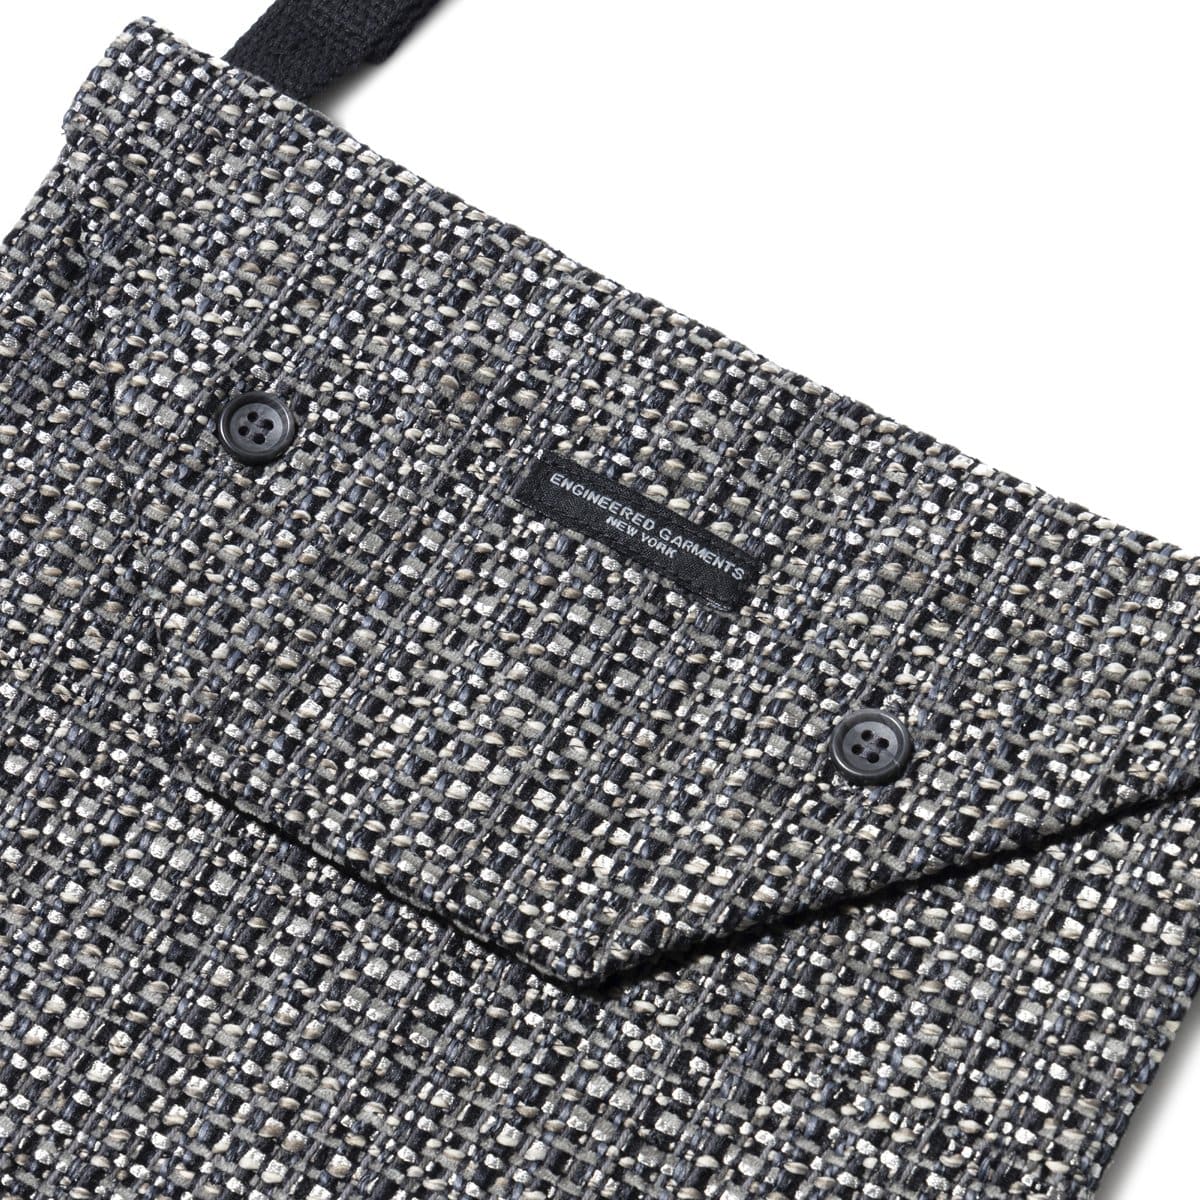 Engineered Garments Bags & Accessories GREY/BLACK PC FAUX TWEED / OS SHOULDER POUCH